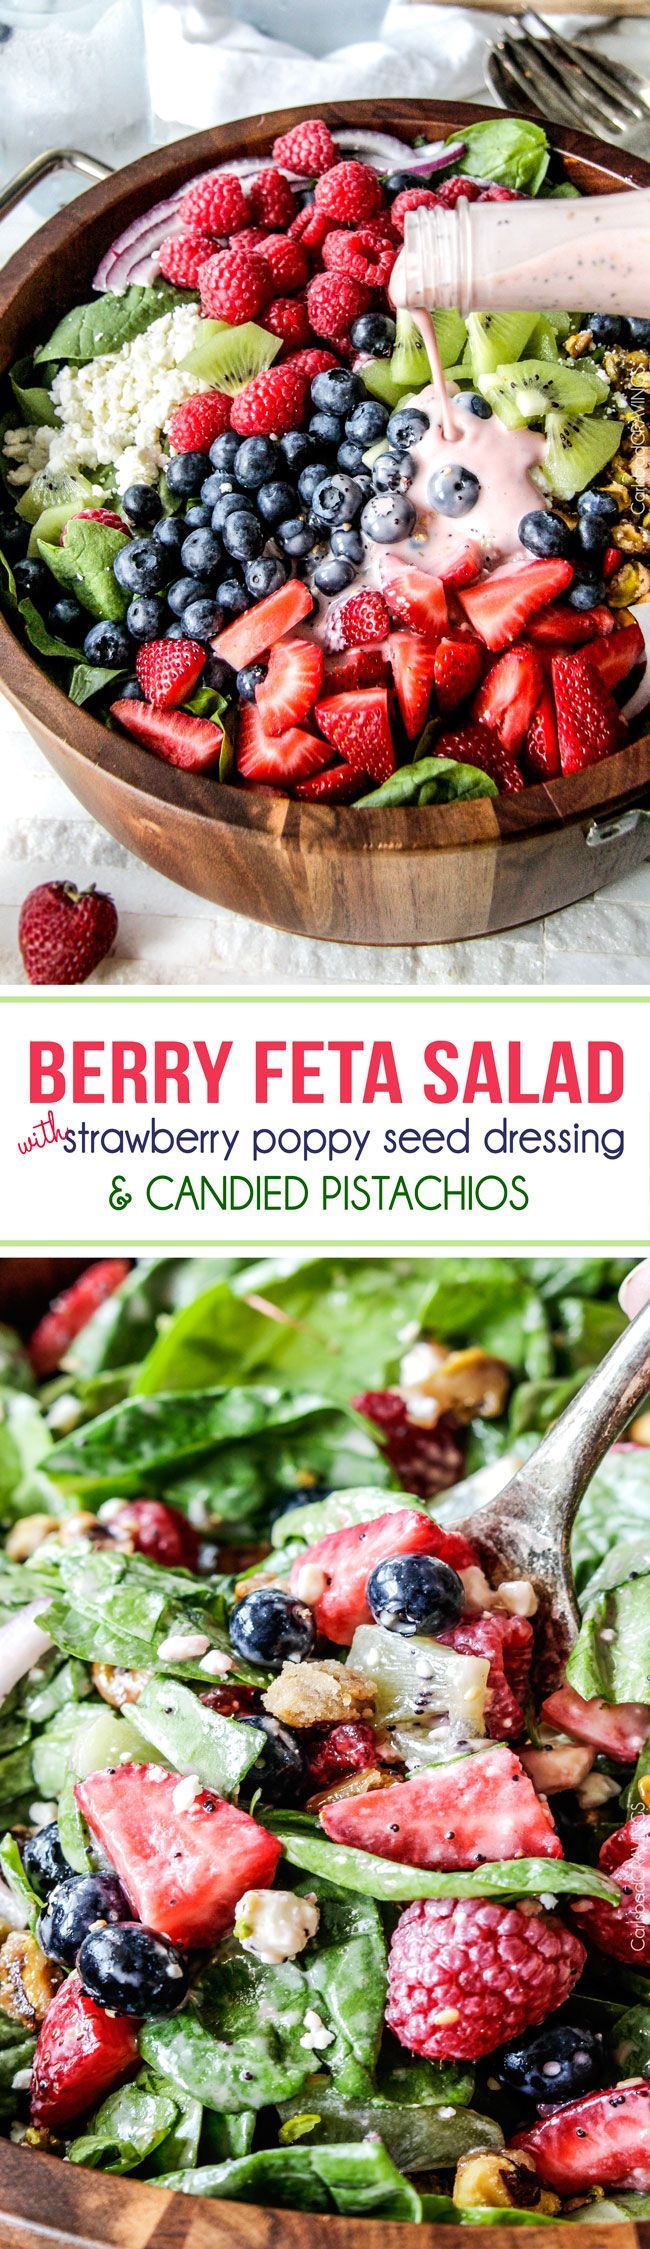 Berry Feta Spinach Salad with Creamy Strawberry Poppy Seed Dressing and CANDIED pistachios is so easy, del